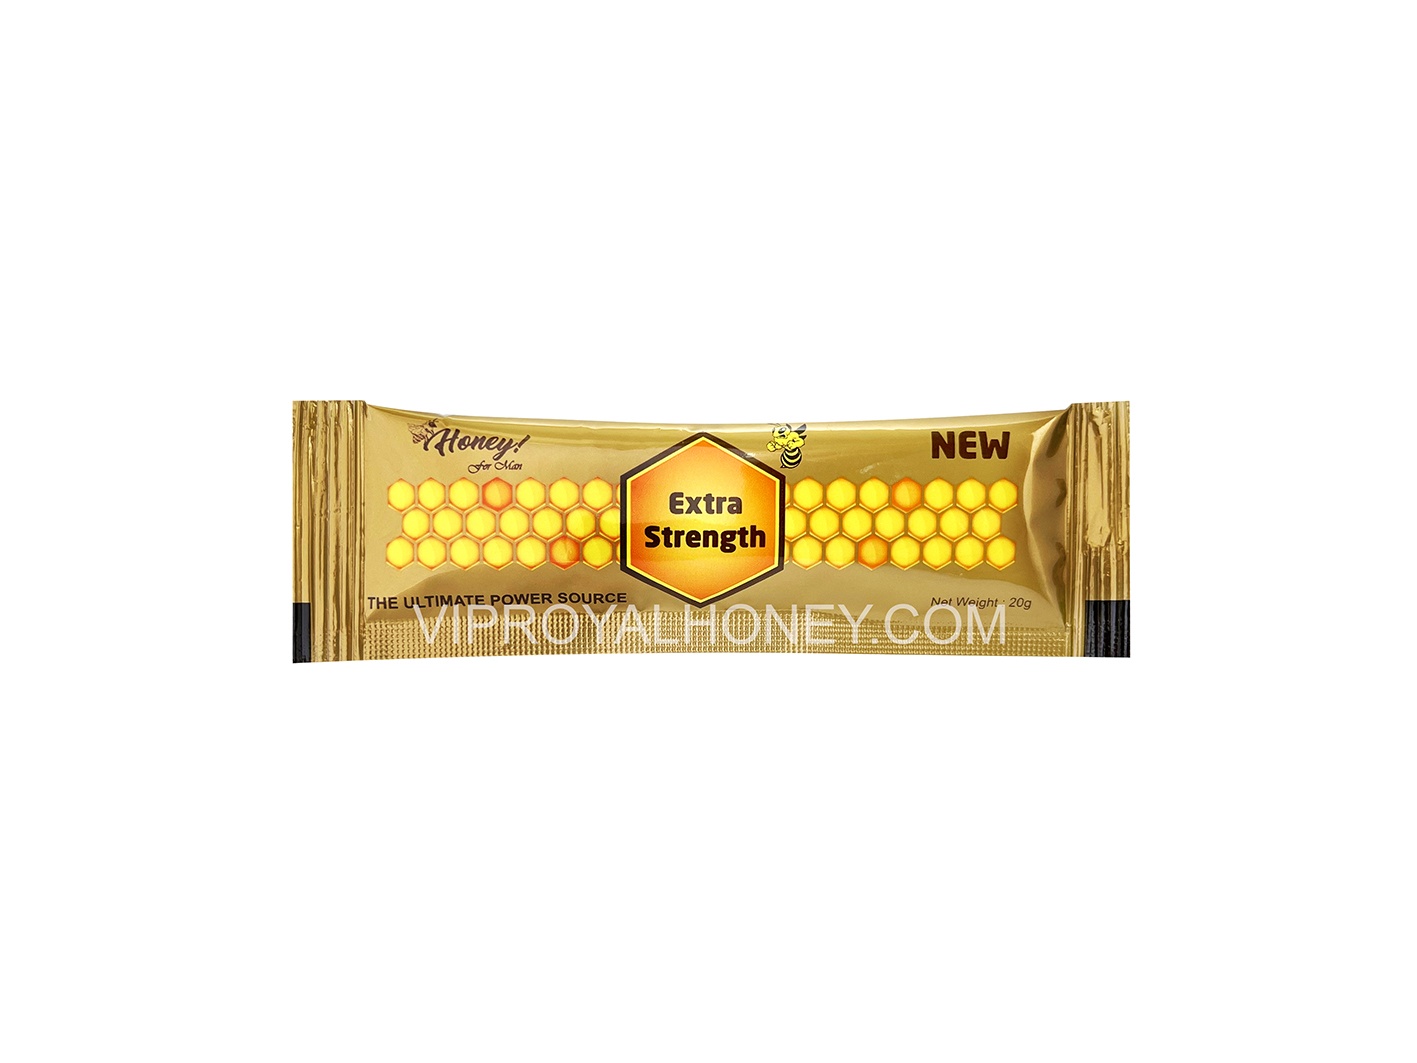 Royal Honey VIP for Men: A Comprehensive Guide on What It Is and